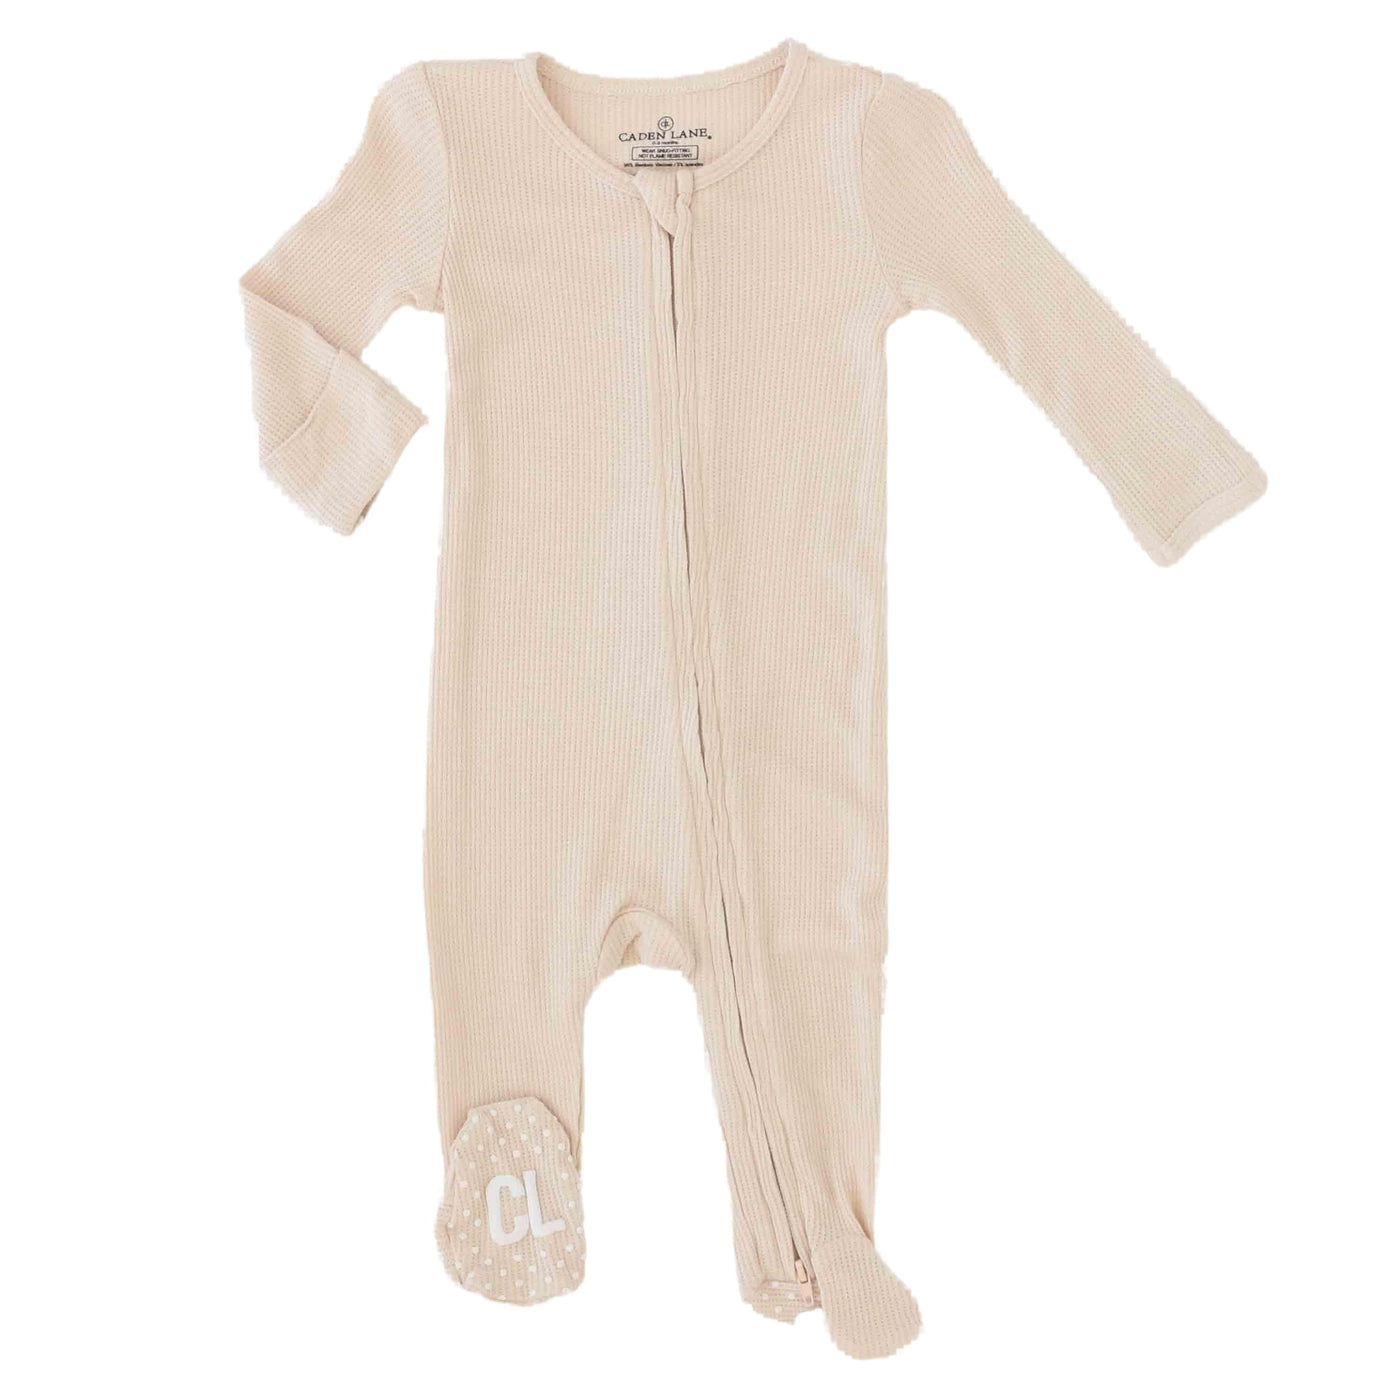 zipper footie for babies bamboo oatmeal color 